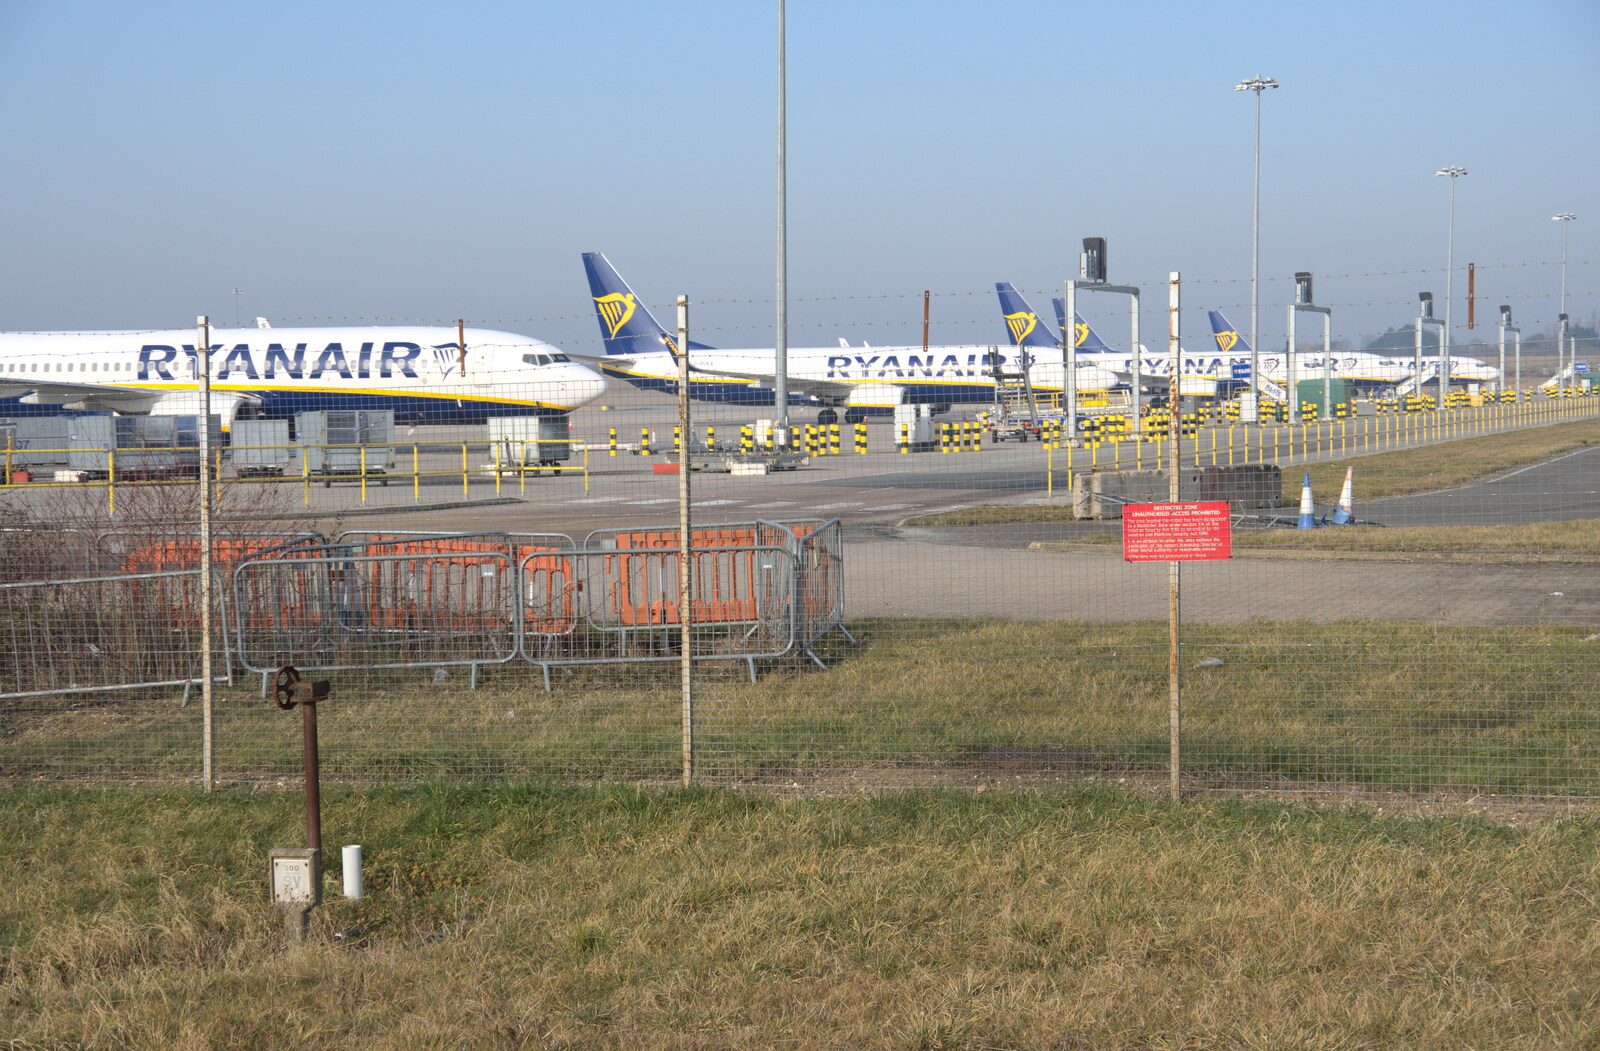 Blackrock North and Newgrange, County Louth, Ireland - 16th February 2023: Ryanair has a lot of planes stacked at Stansted